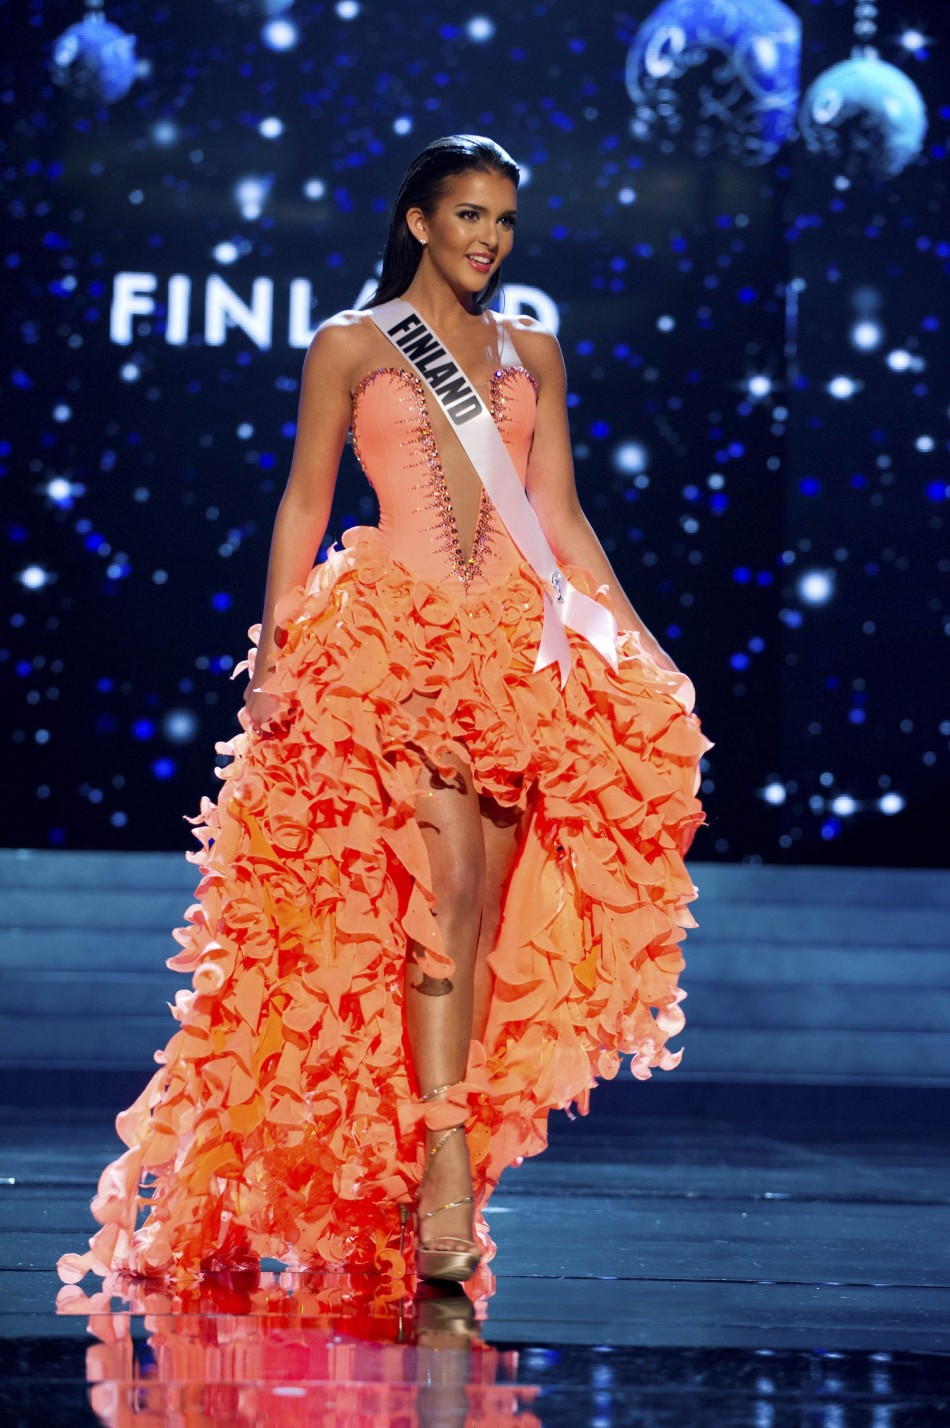 Miss Finland 2012 Chafak competes in an evening gown of her choice during the Evening Gown Competition of the 2012 Miss Universe Presentation Show in Las Vegas